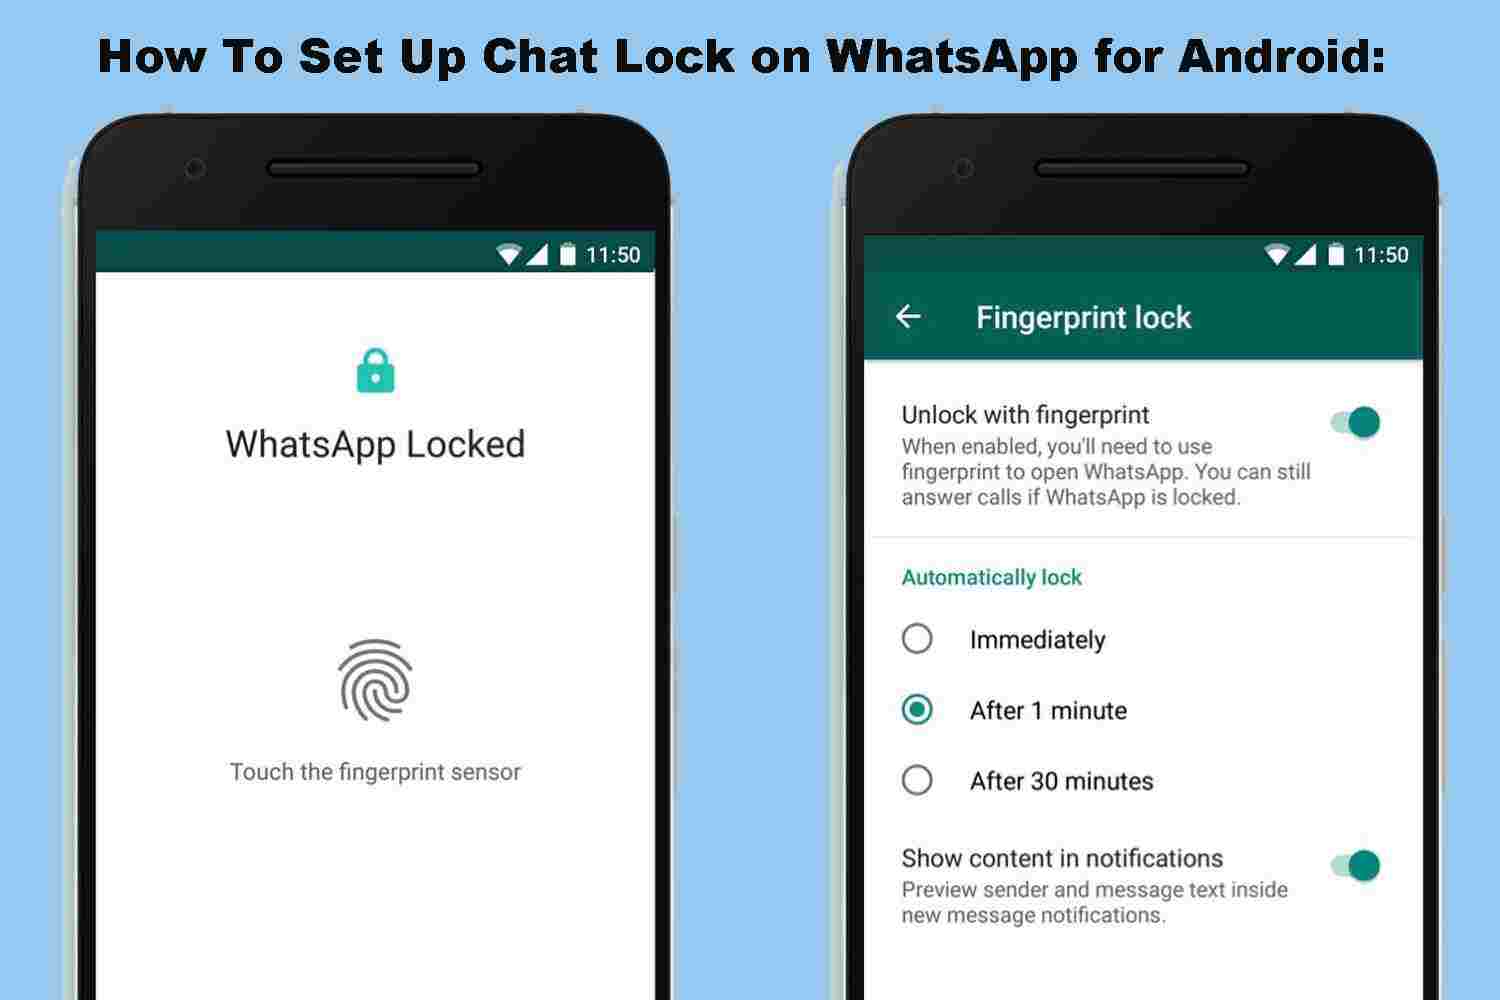 How To Set Up Chat Lock on WhatsApp for Android